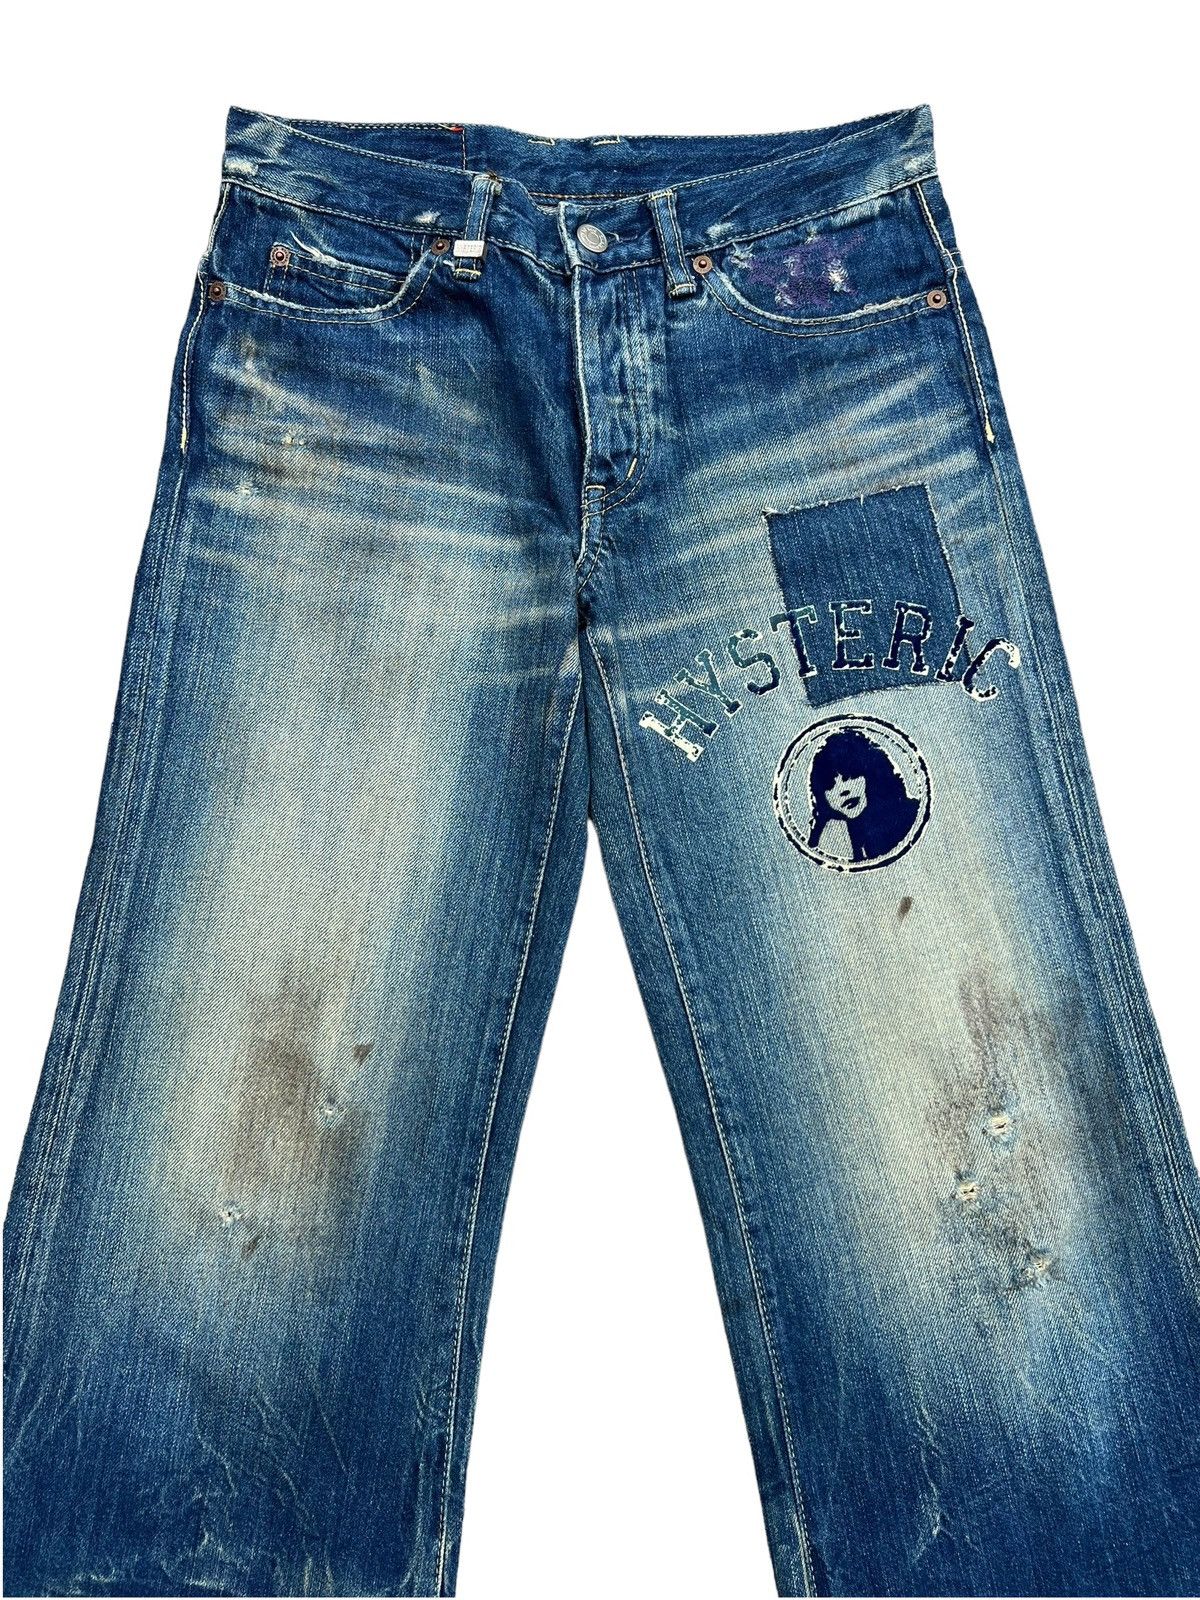 Hysteric Glamour Distressed Lowrise Flare Denim Jeans 29x32 - 4